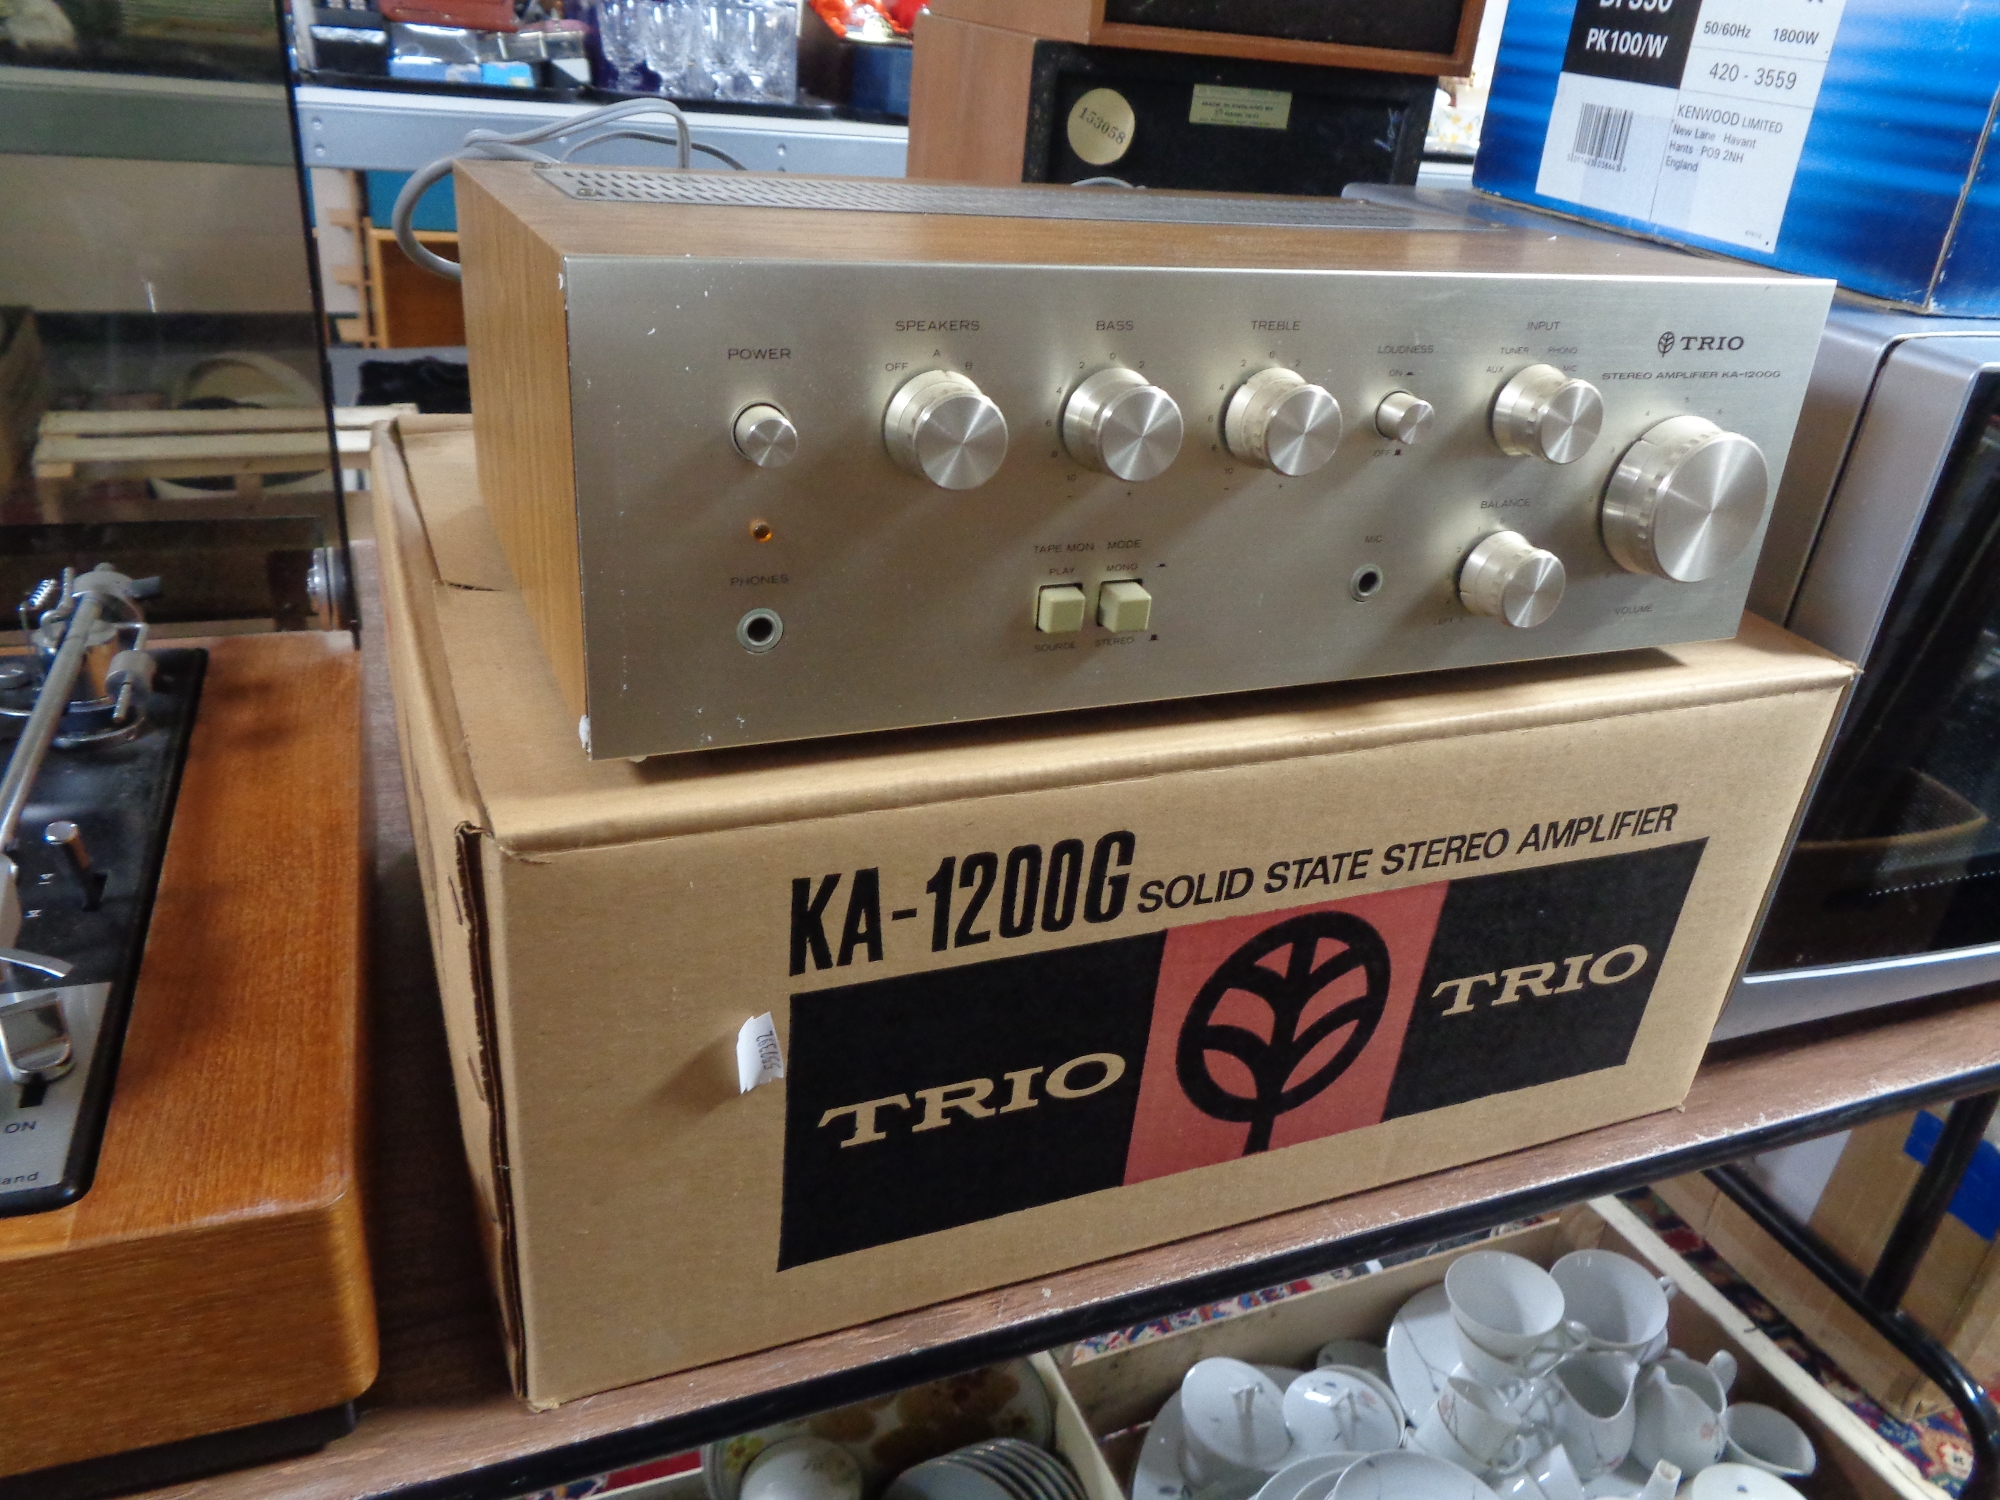 A boxed vintage Trio Solid state amplifier KA-1200 G